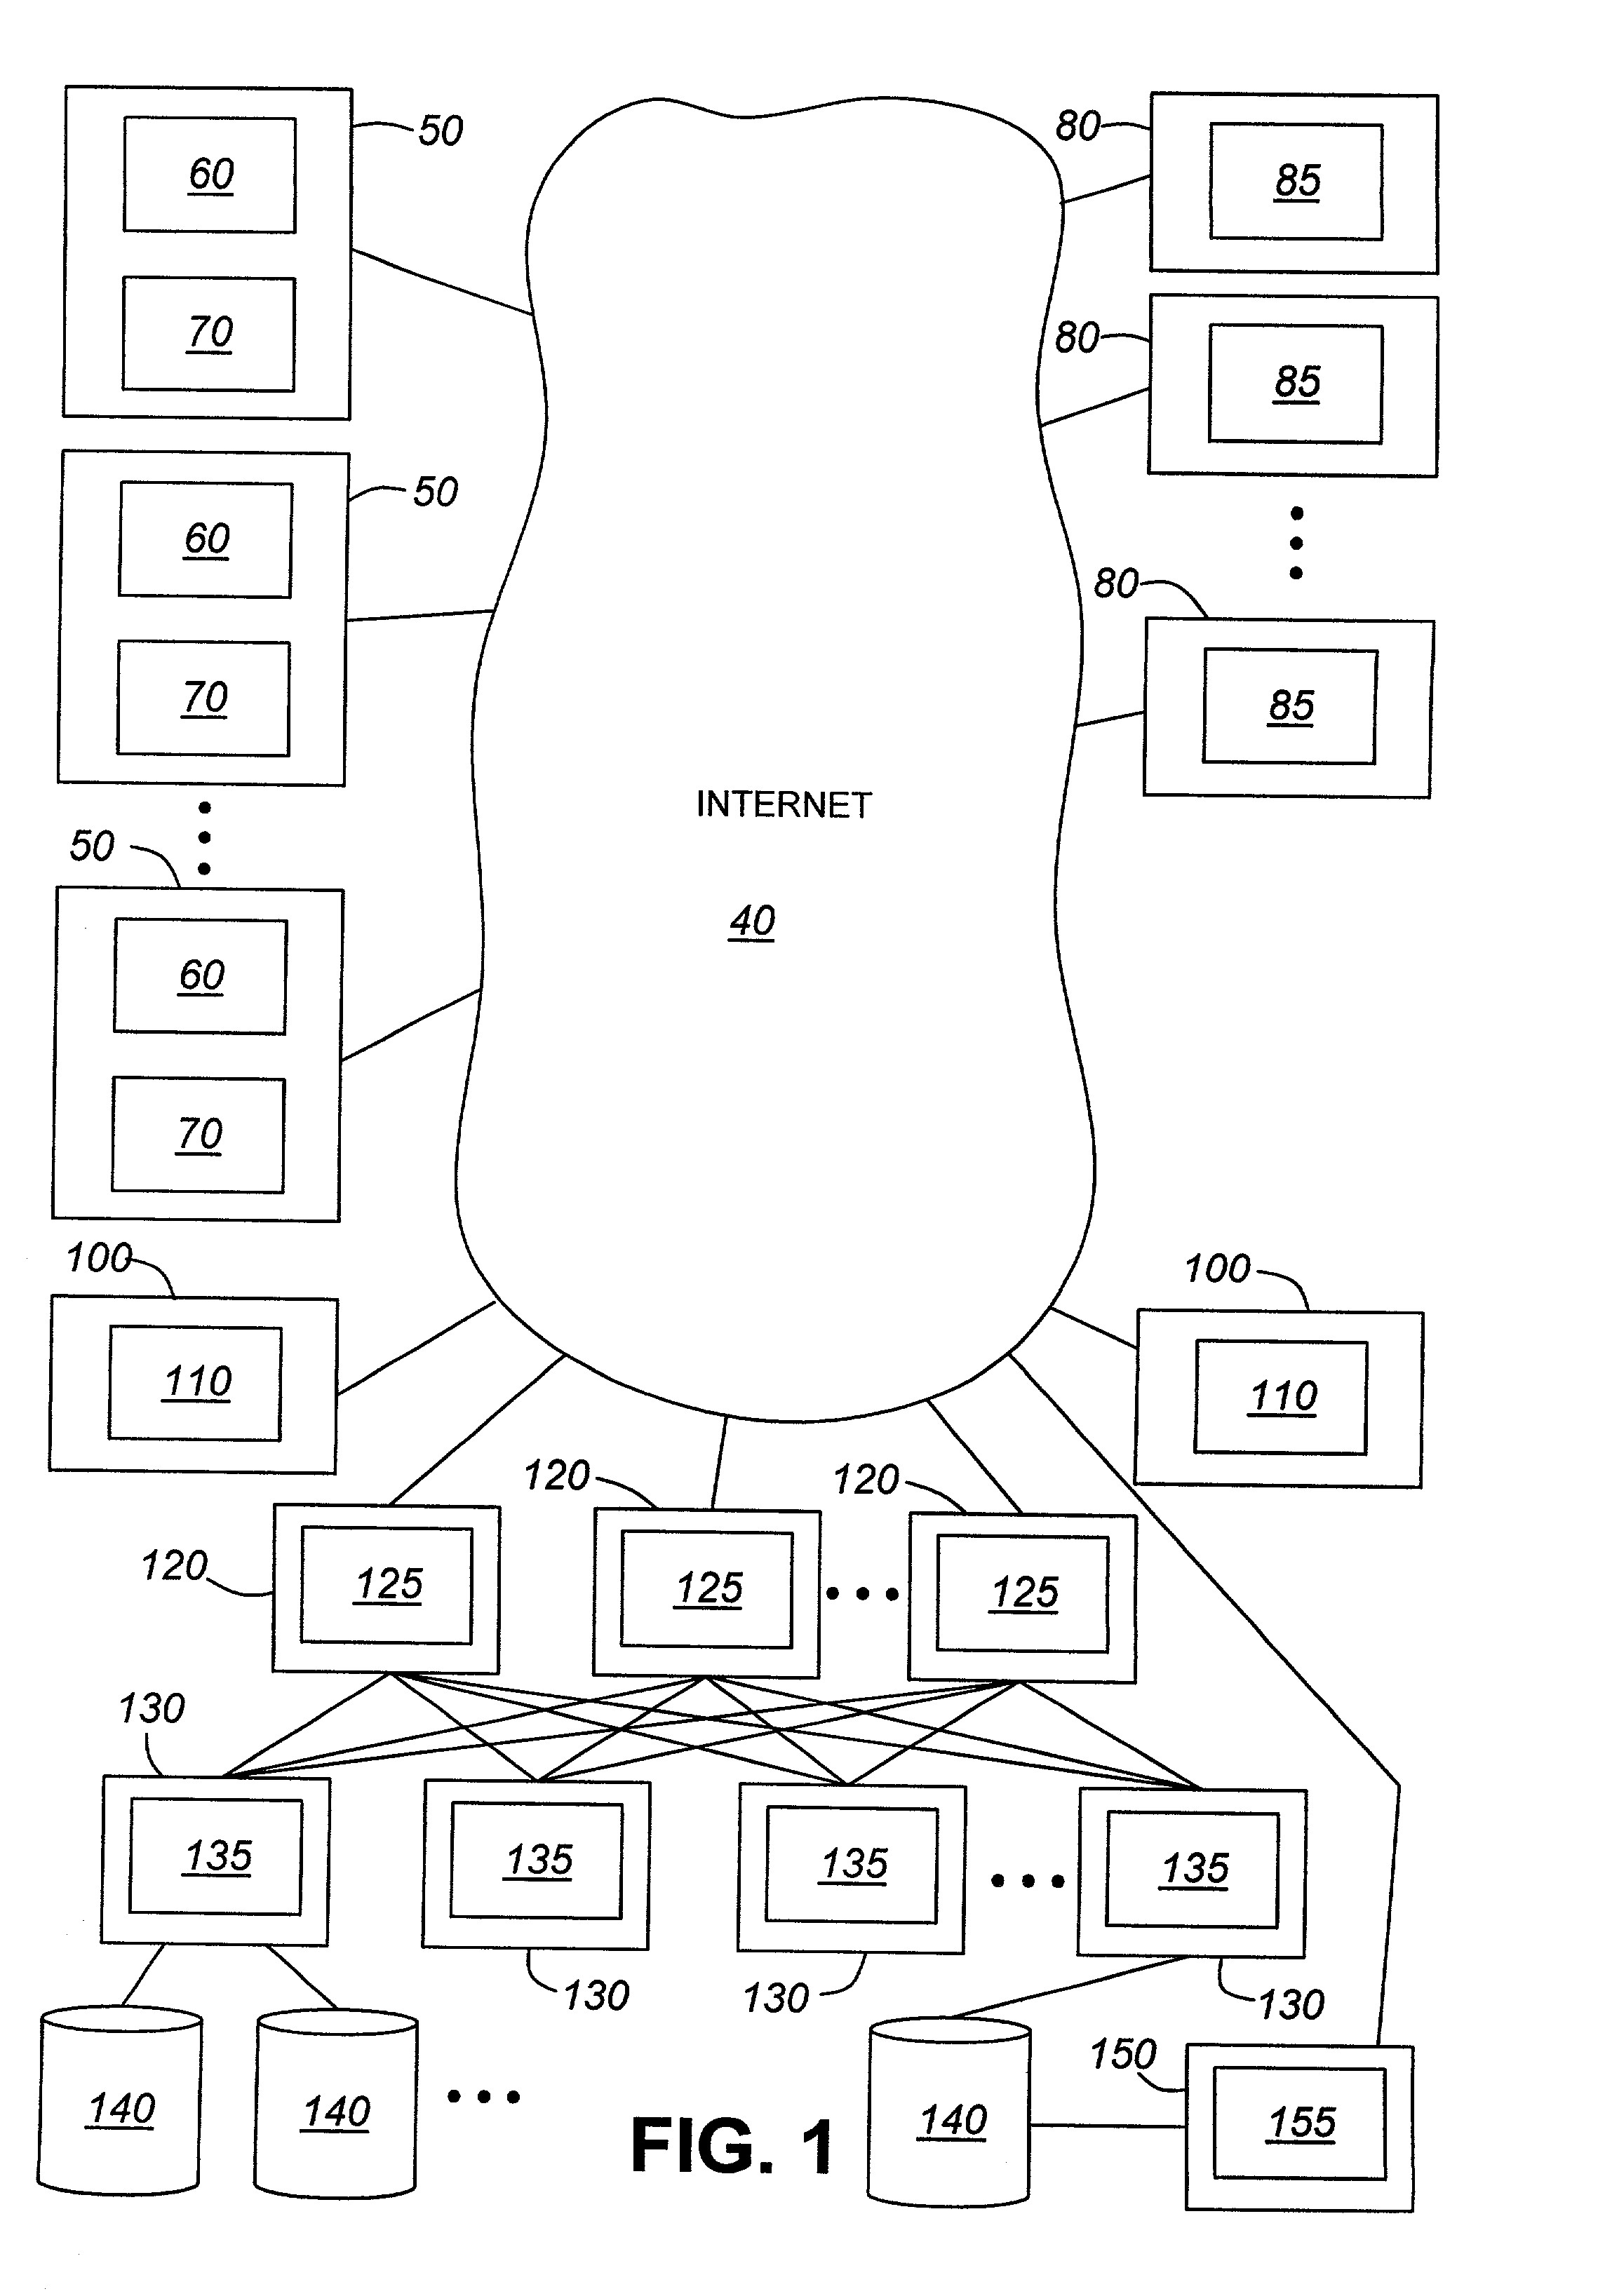 Method and system for managing performance of data transfers for a data access system